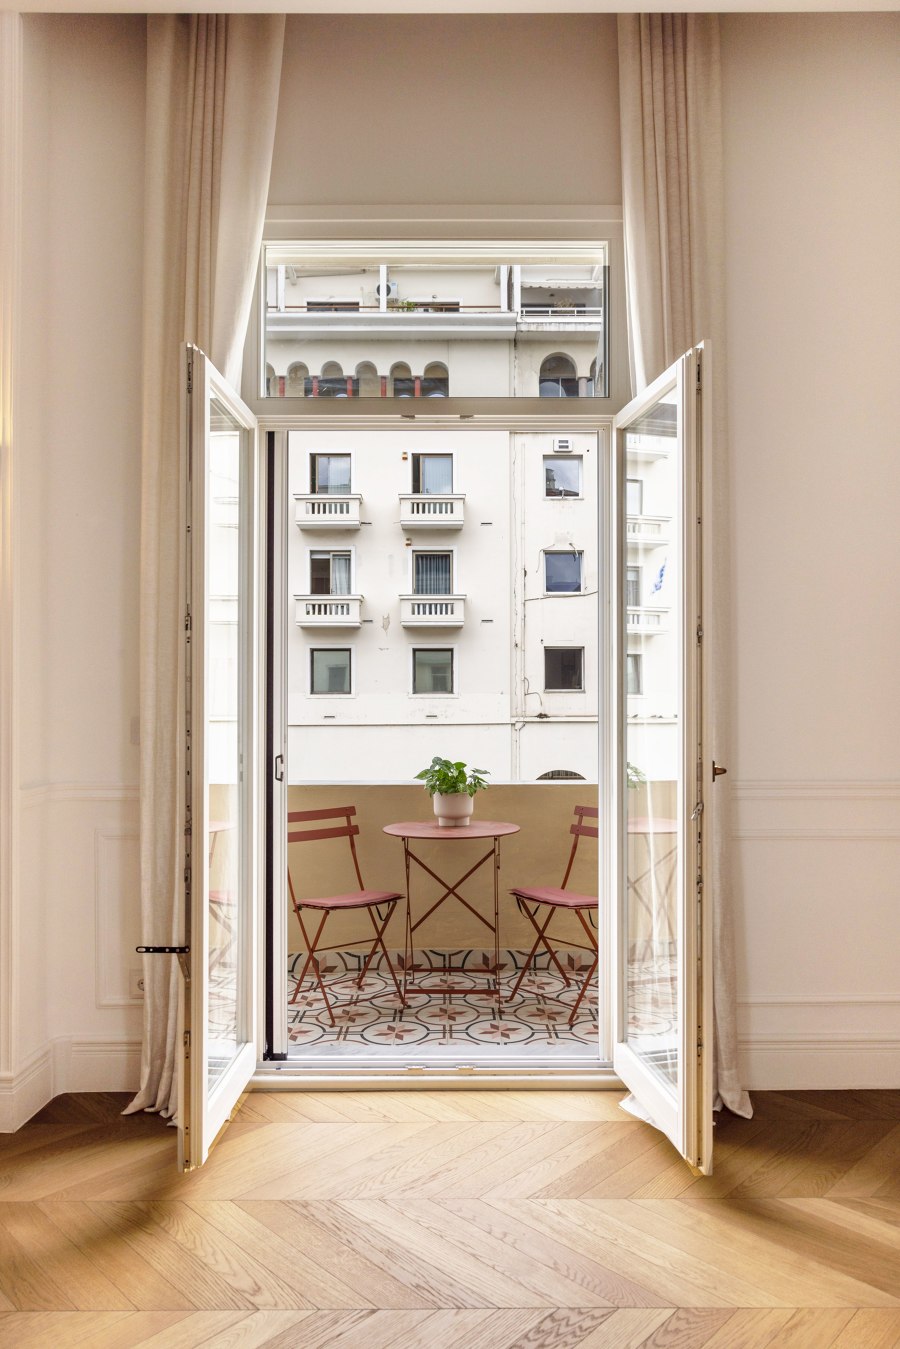 ARI Historic apartment redesign by FLUO | Living space